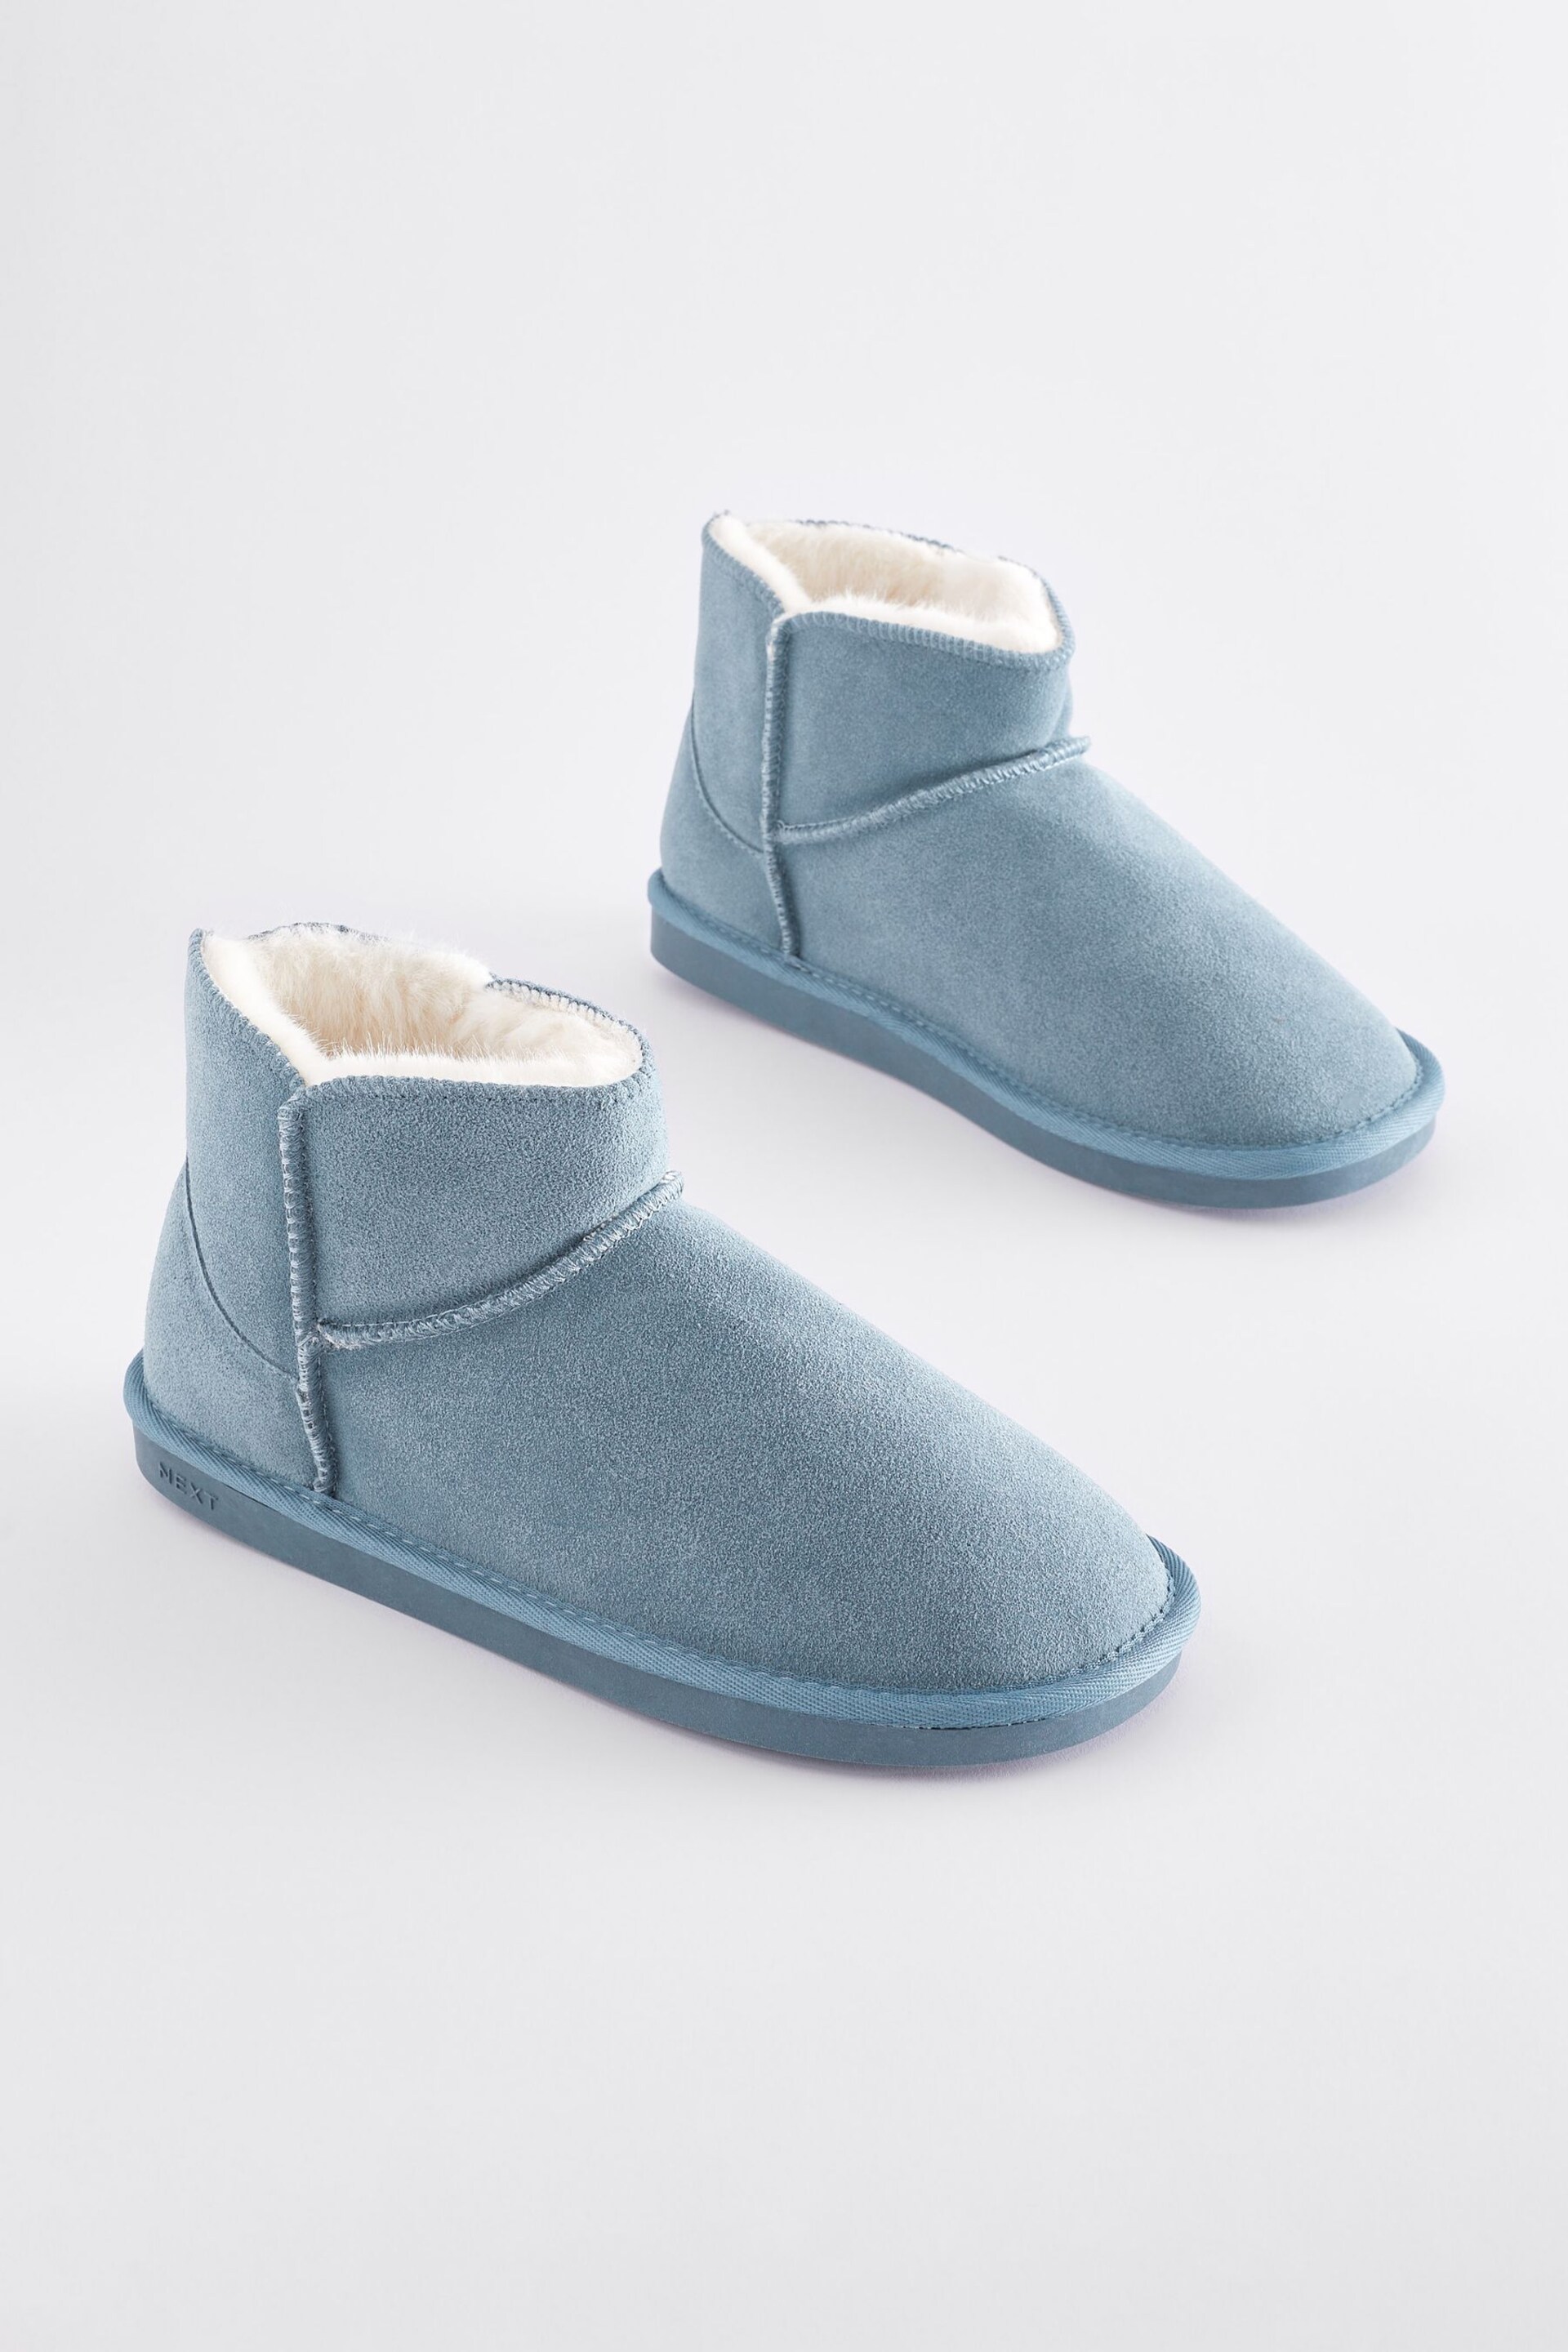 Blue Suede Boot Slippers - Image 2 of 7